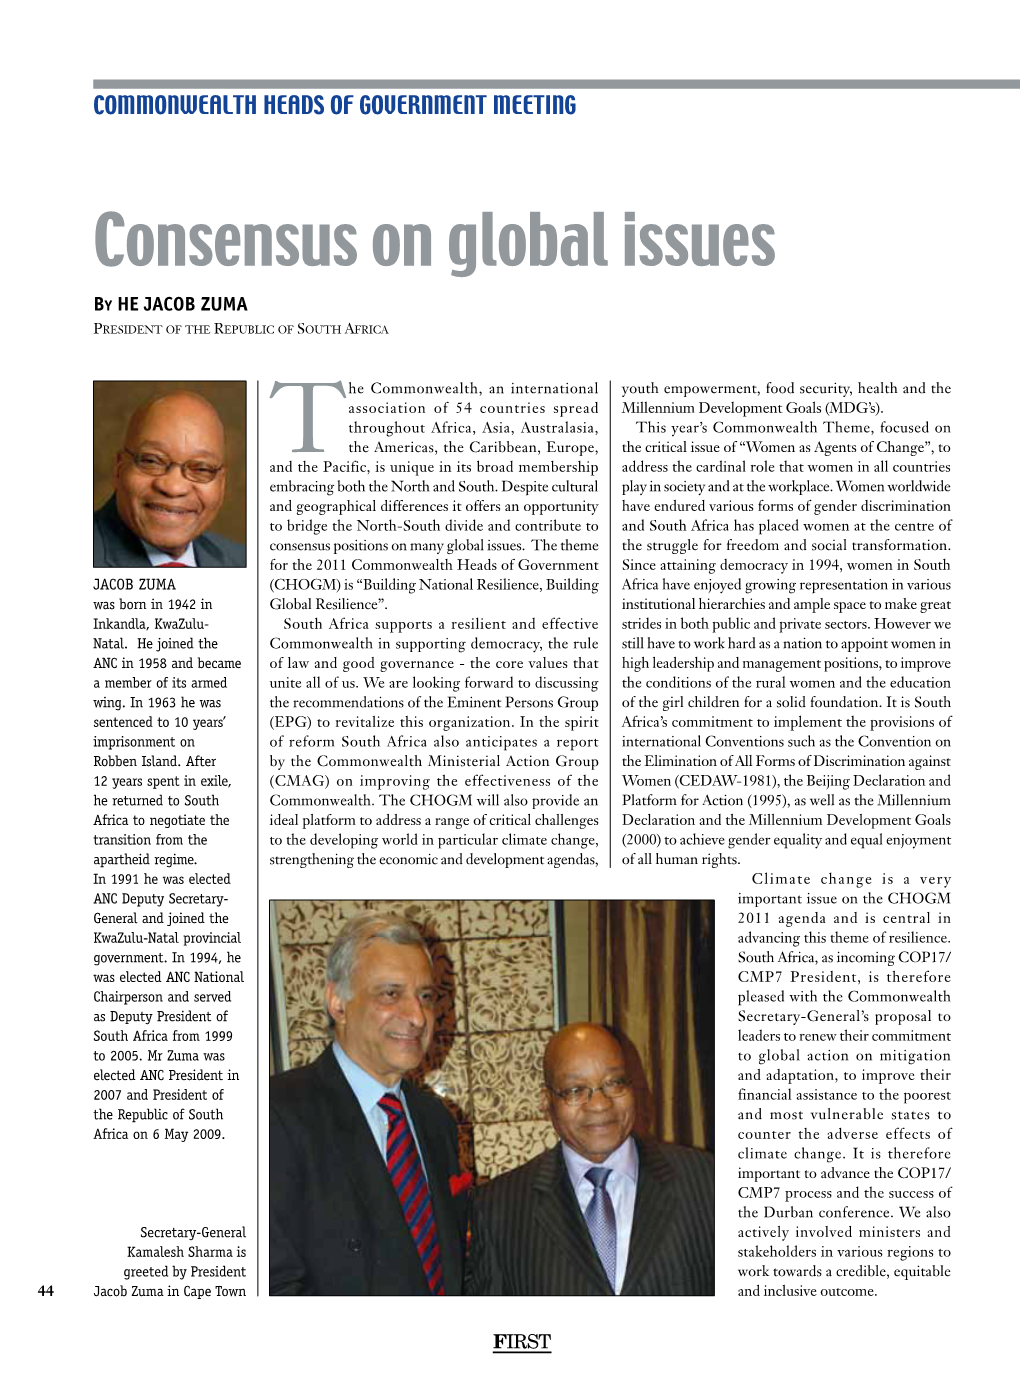 Consensus on Global Issues by HE Jacob Zuma President of the Republic of South Africa